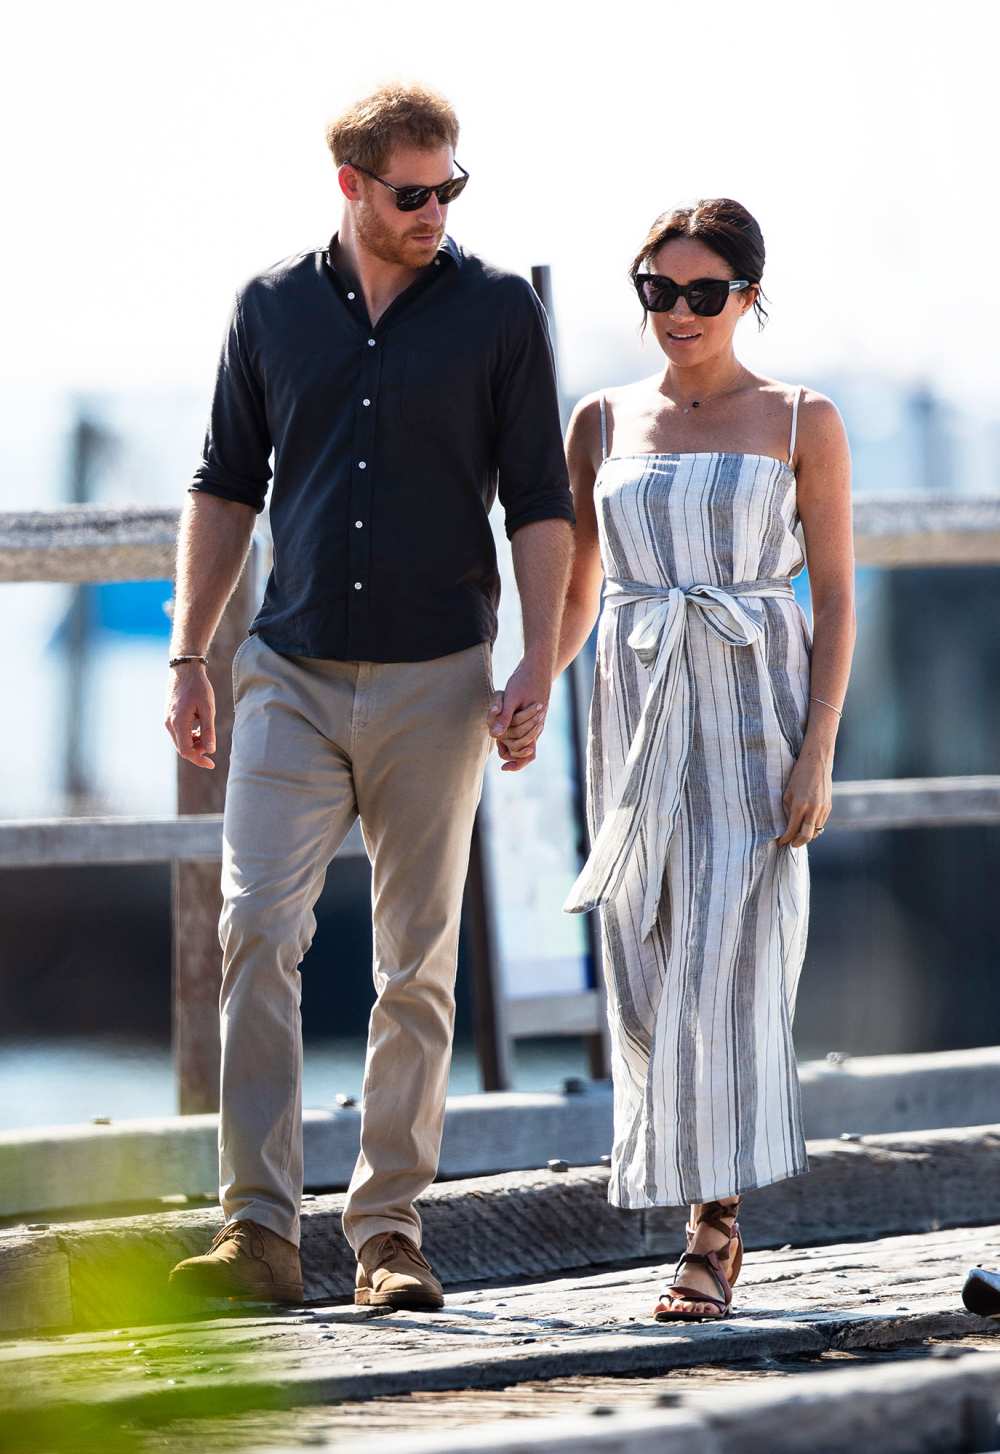 Meghan Markle Wears Eco-Friendly Clothing, Shoes: Details